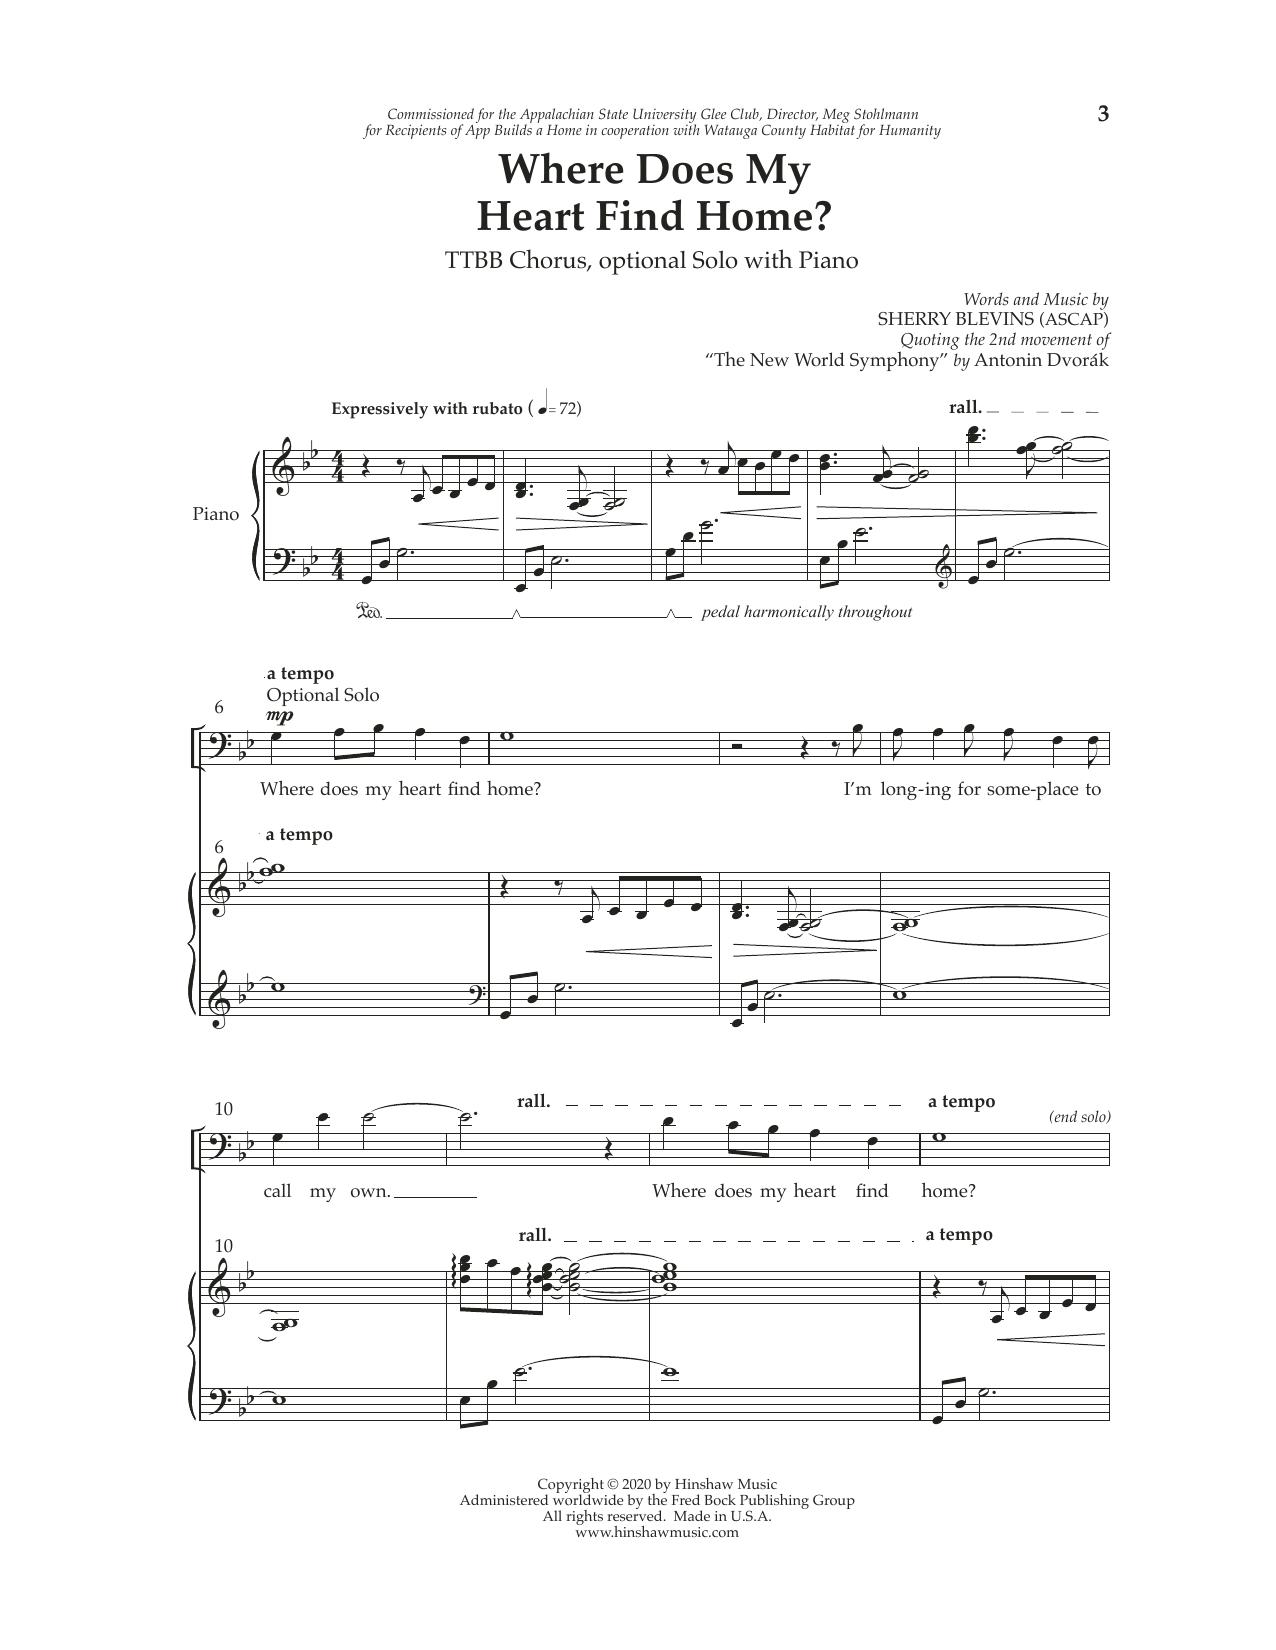 Download Sherry Blevins Where Does My Heart Find Home Sheet Music